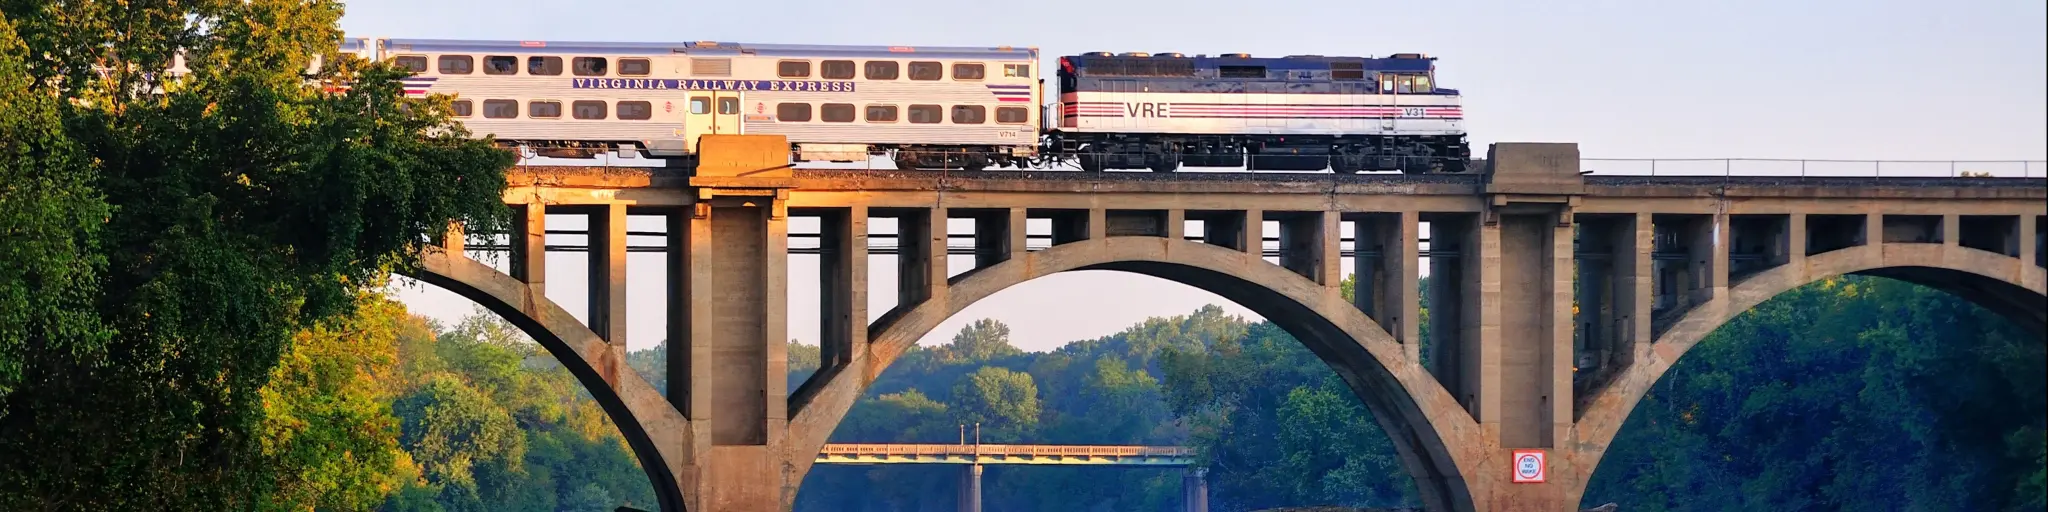  An early morning Virgina Railway Express commuter train passes over the Rappahannock River en route to Washington, D.C.